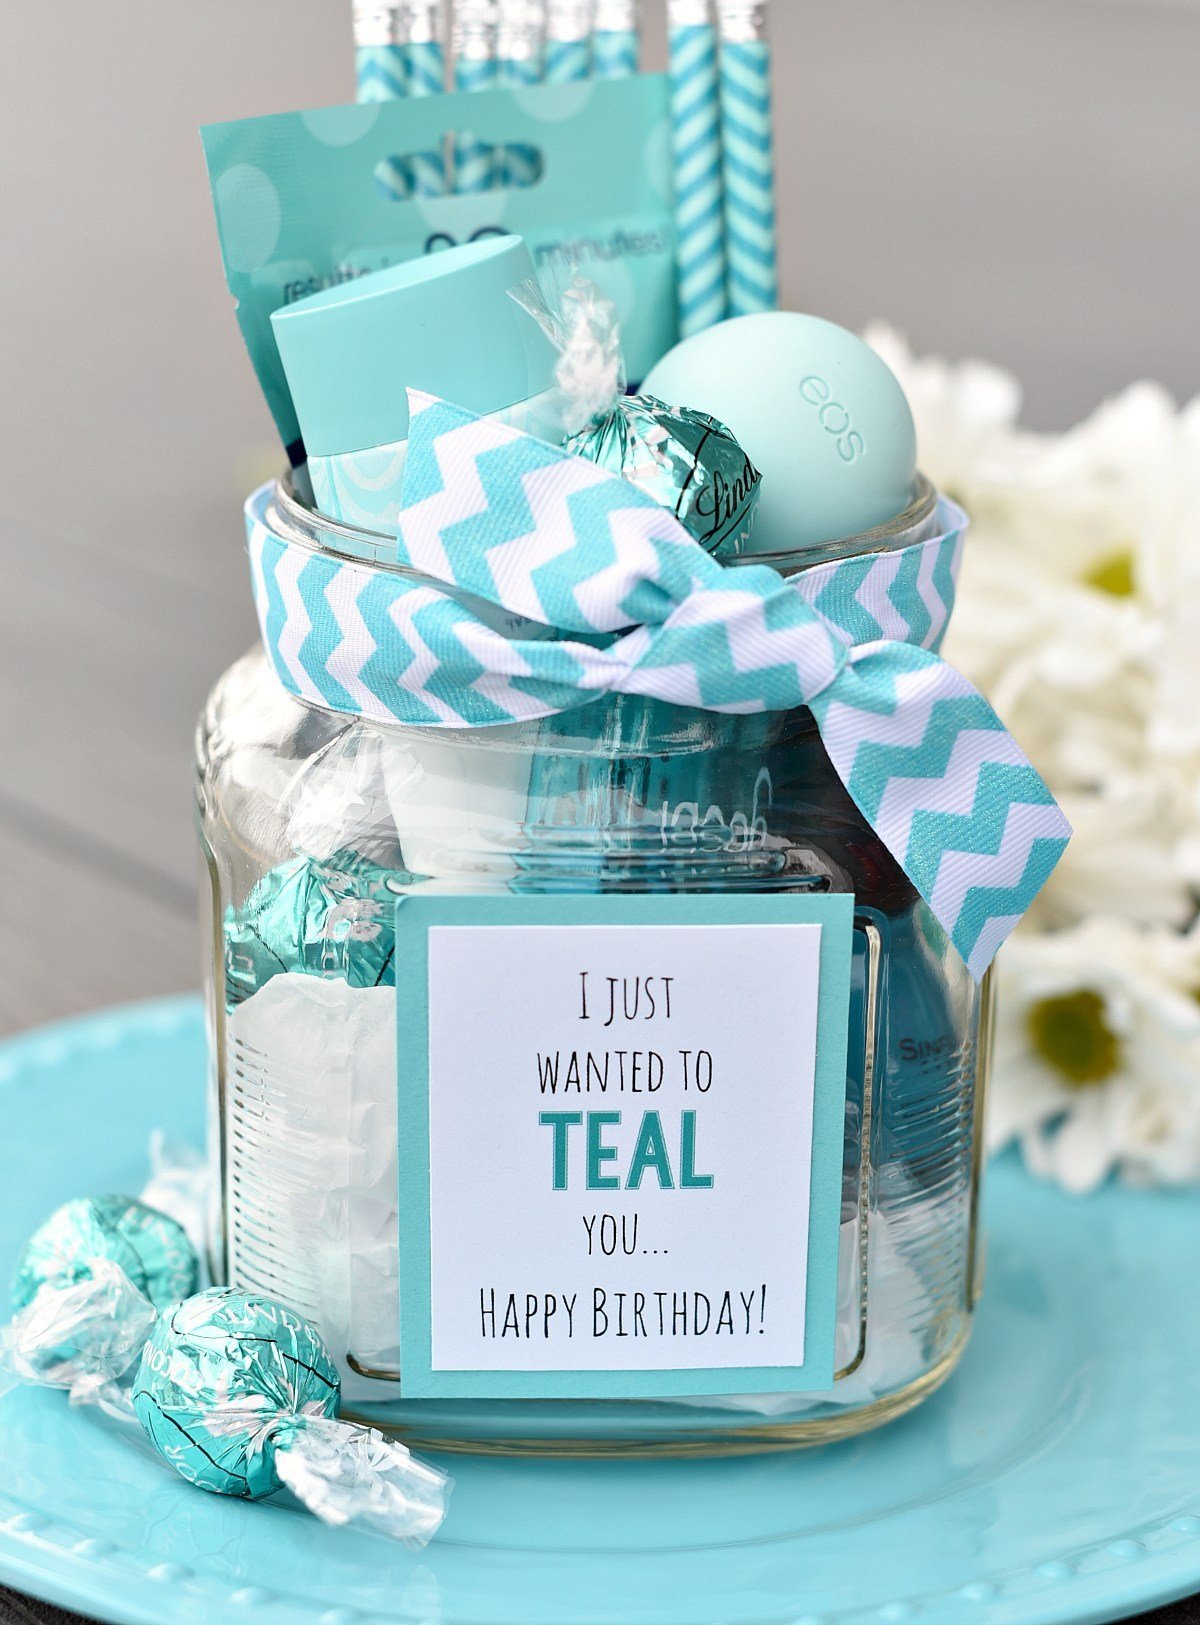 Teal-Themed Birthday Gift for a Friend - Crazy Little Projects